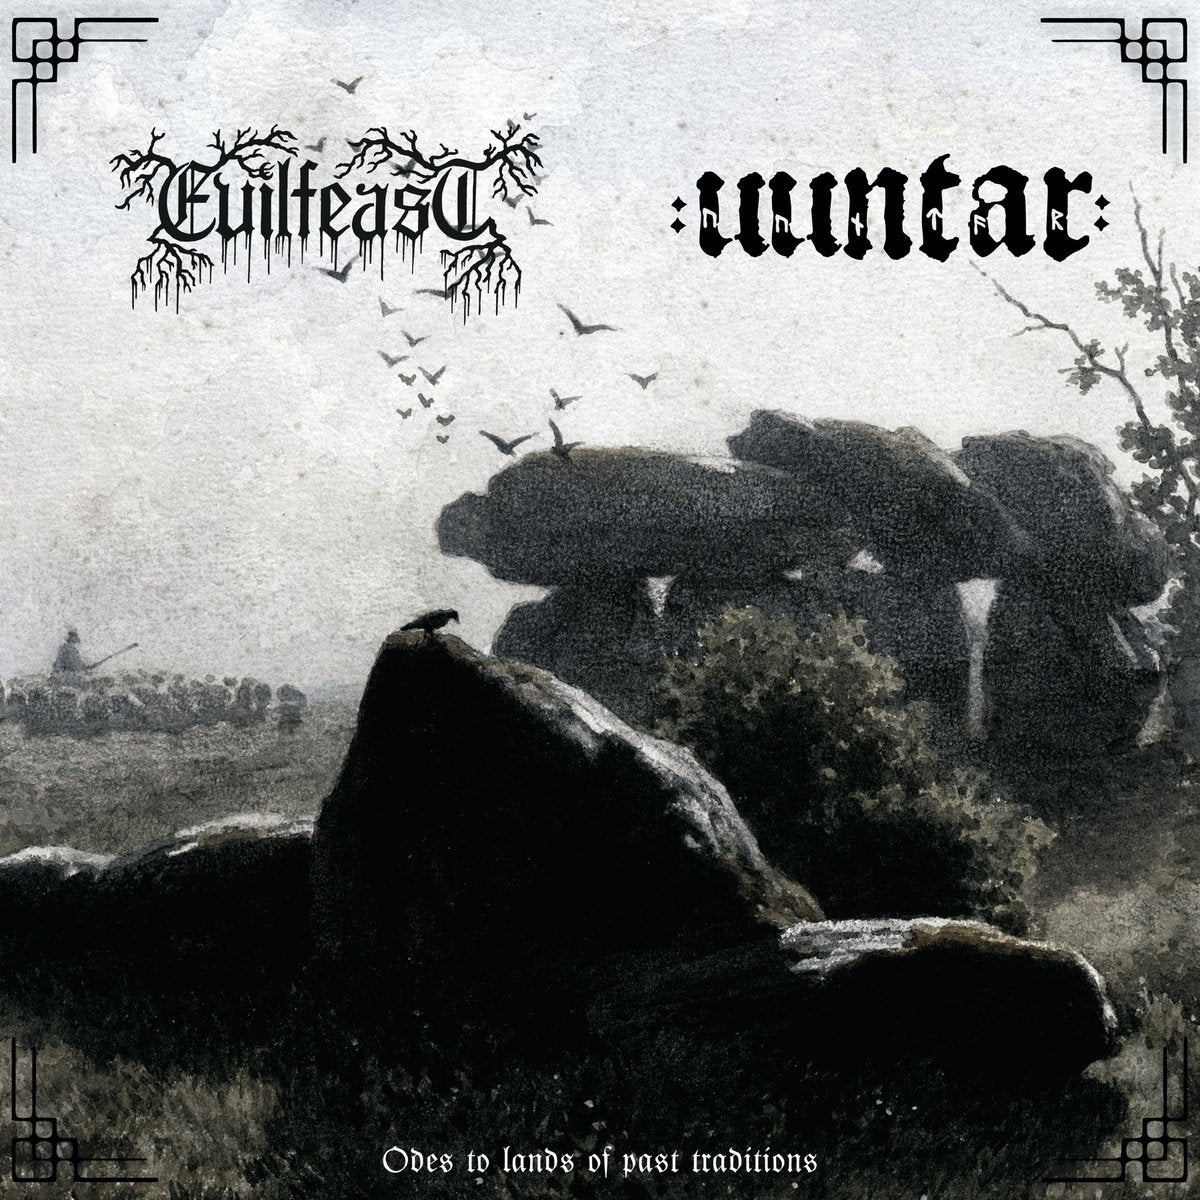 [SOLD OUT] EVILFEAST / UUNTAR "Odes To Lands Of Past Traditions" split vinyl LP (220g)